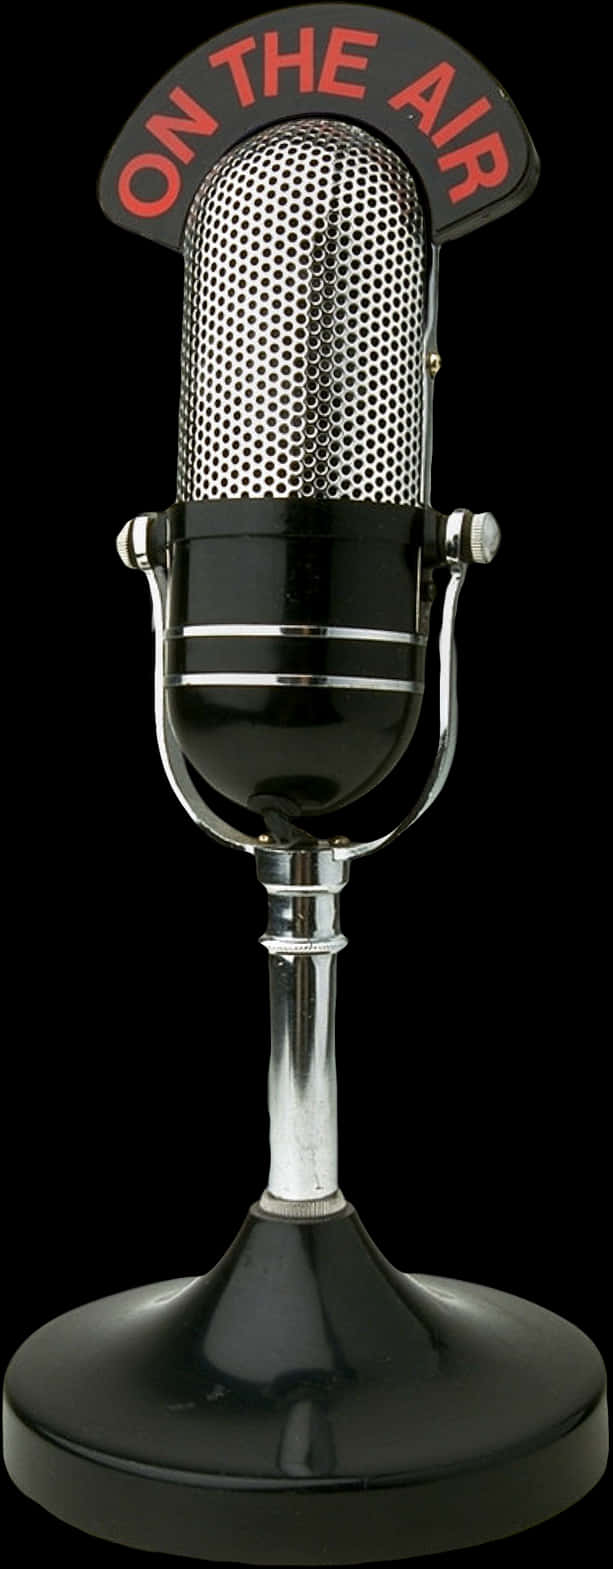 Vintage On The Air Microphone